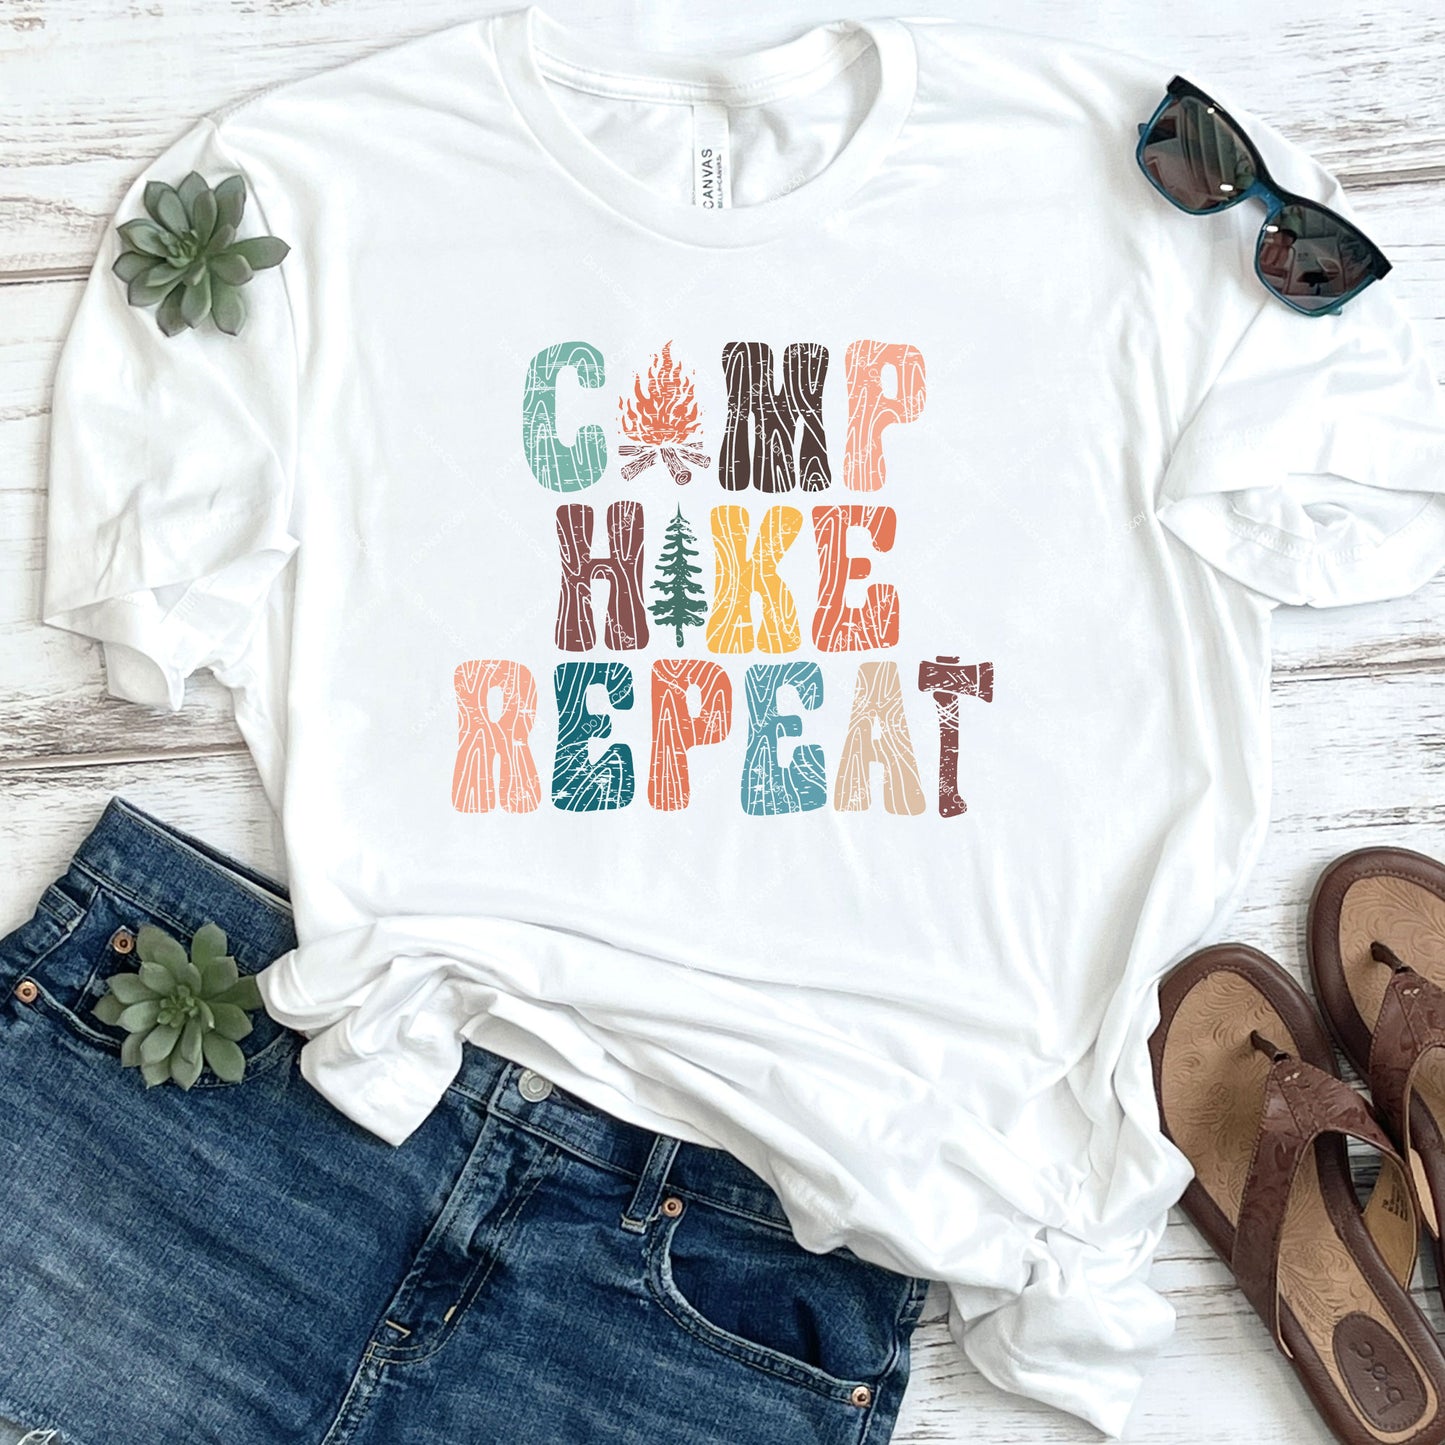 Camp Hike Repeat DTF